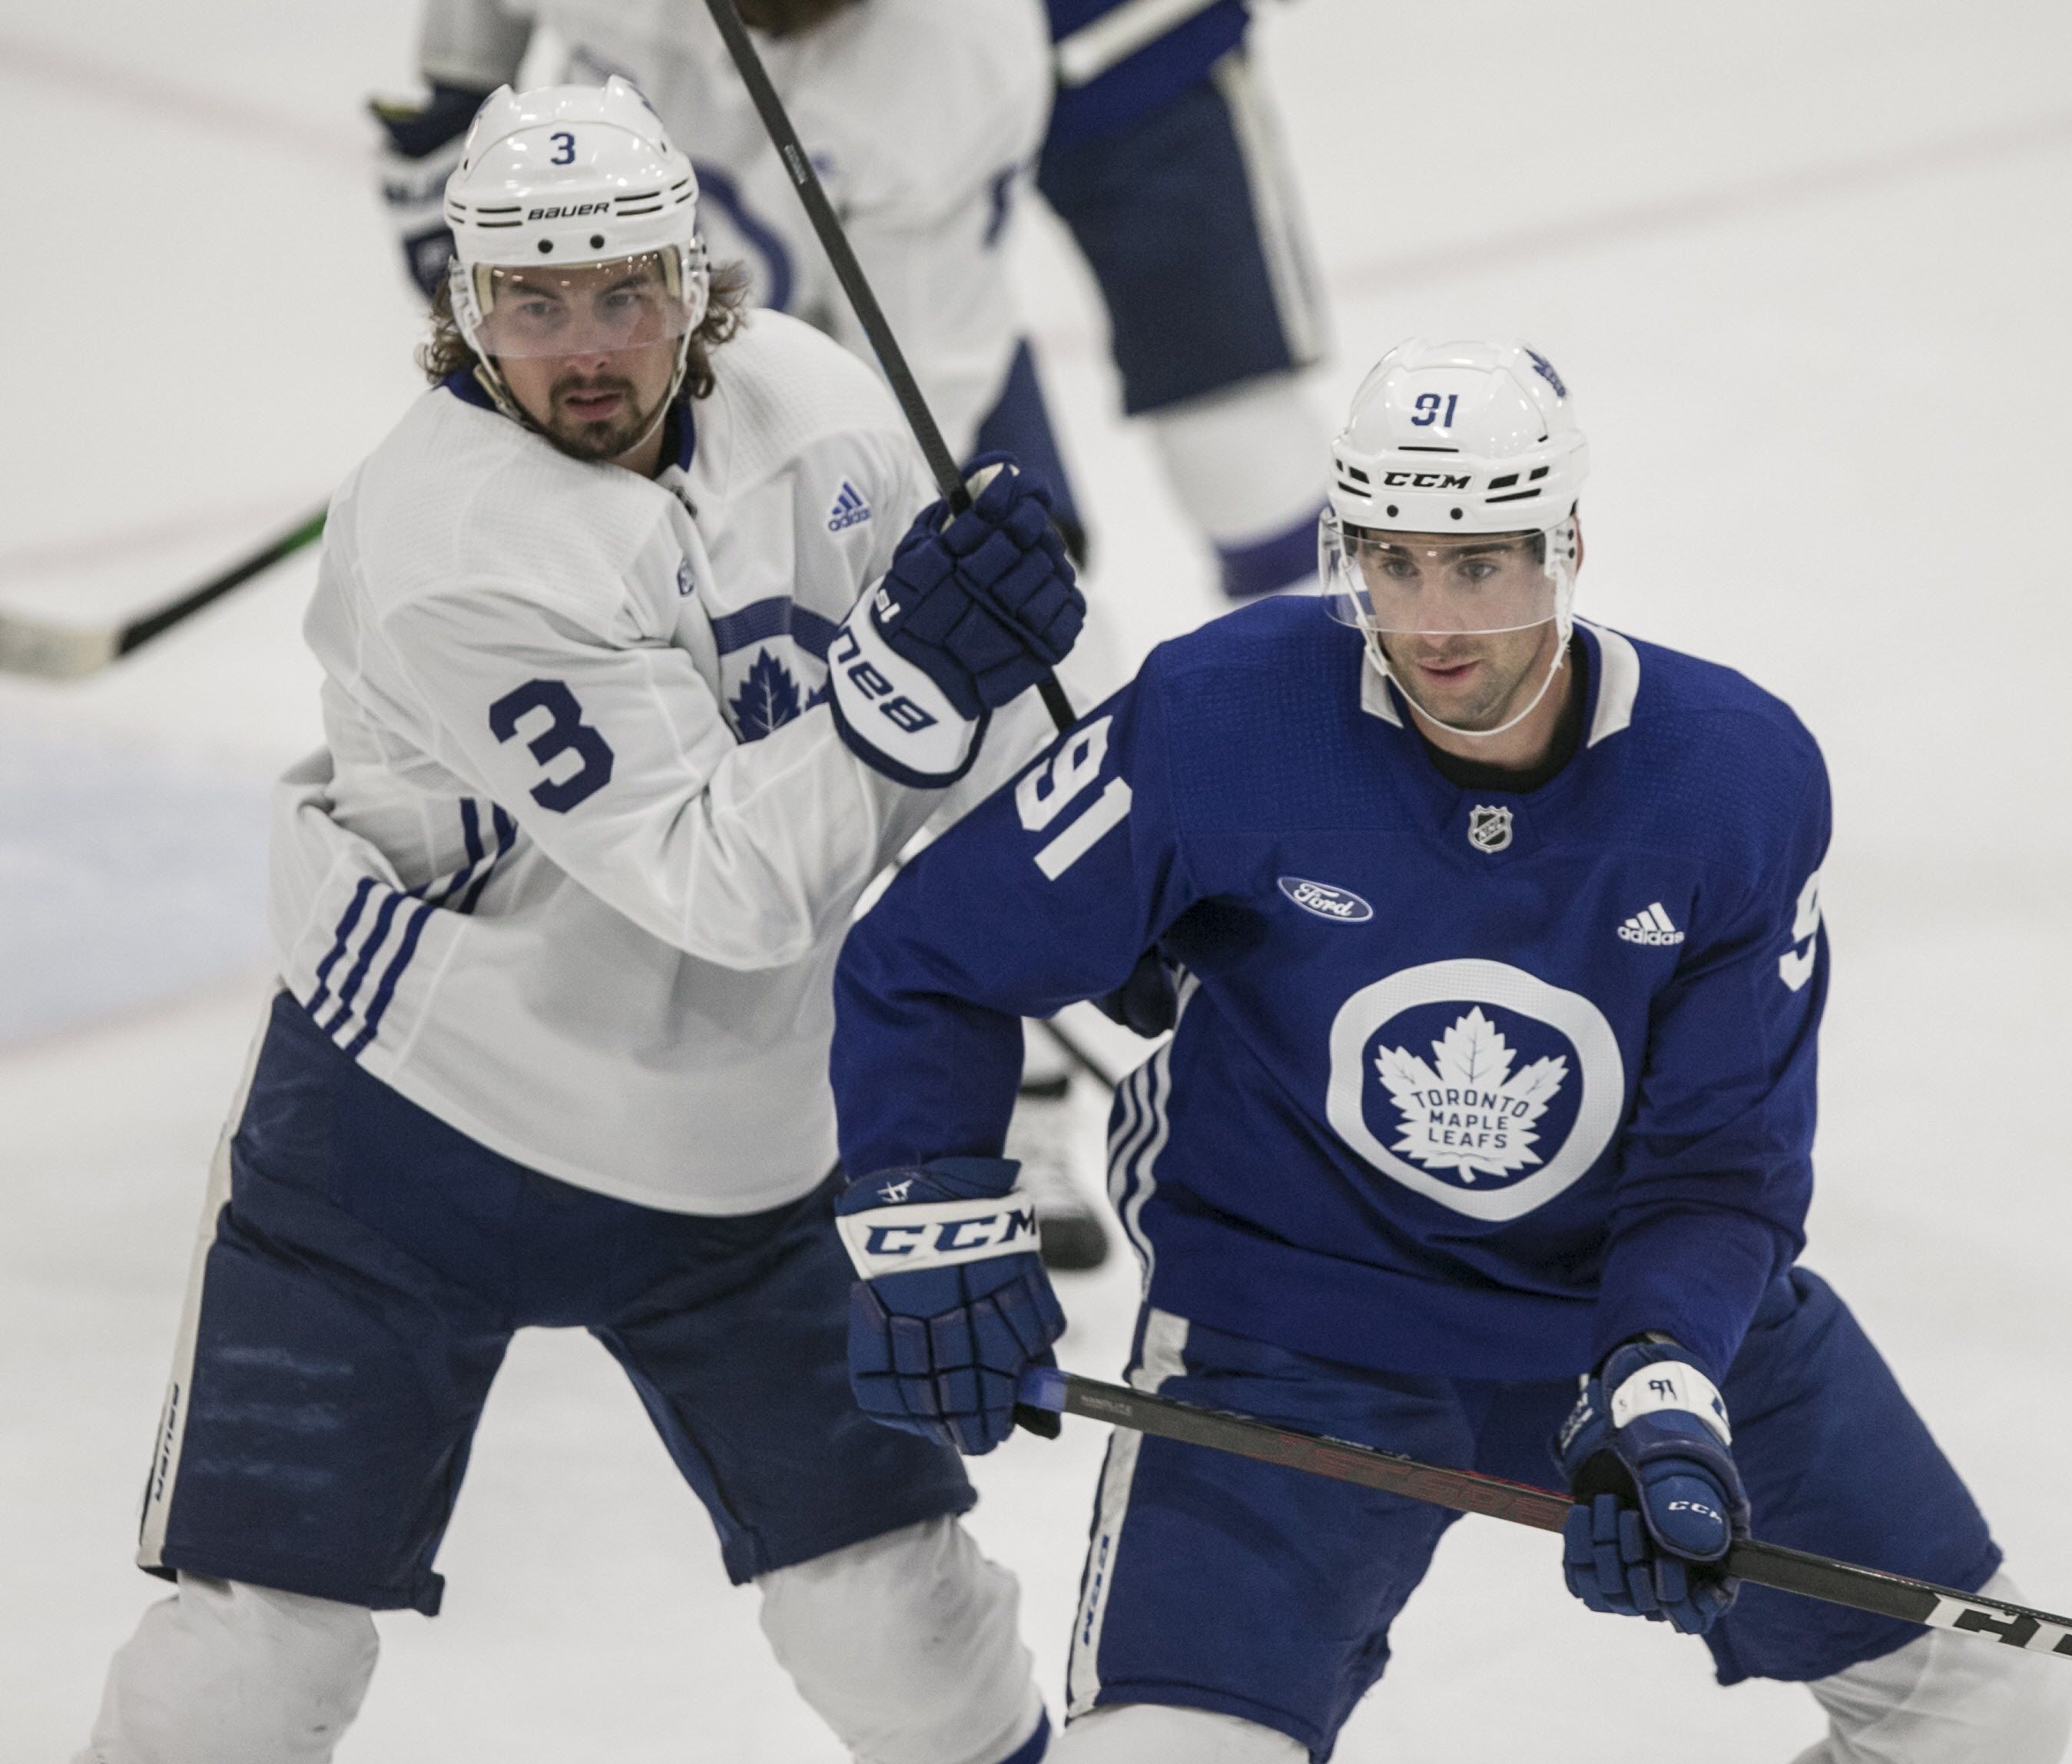 NHL: Maple Leafs' Tavares expects to be back for training camp